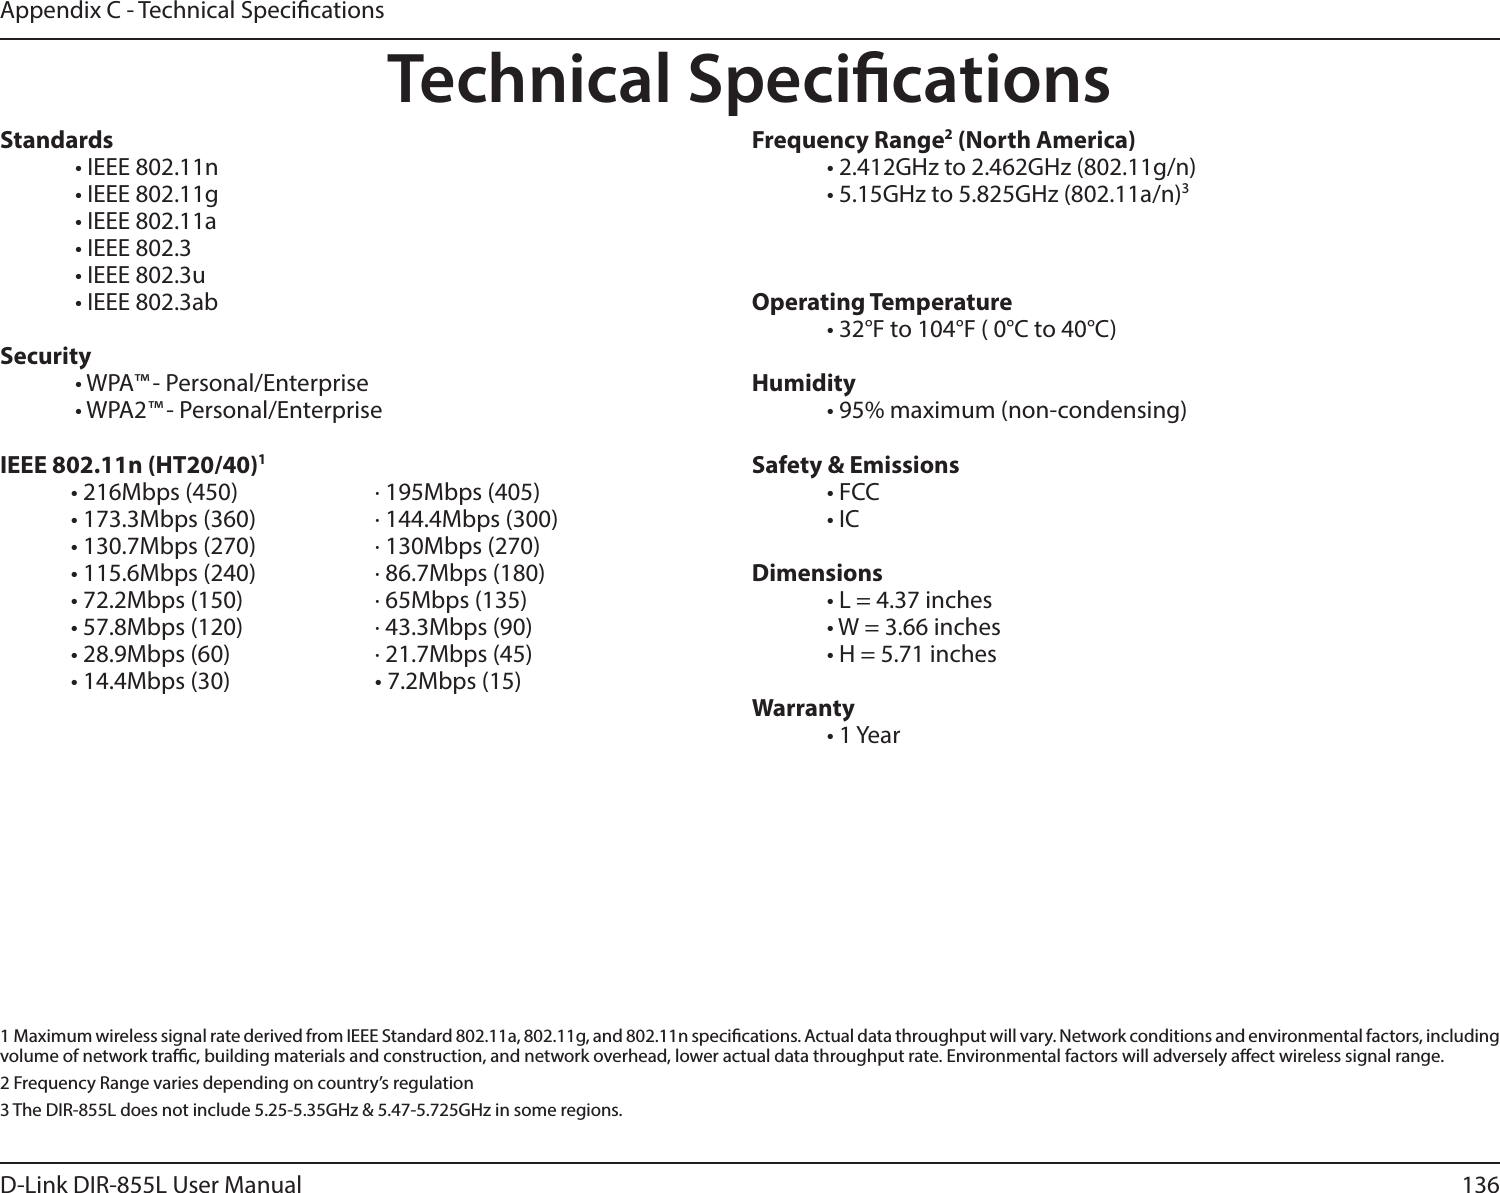 136D-Link DIR-855L User ManualAppendix C - Technical SpecicationsTechnical SpecicationsStandards  • IEEE 802.11n  • IEEE 802.11g  • IEEE 802.11a  • IEEE 802.3  • IEEE 802.3u  • IEEE 802.3abSecurity  • WPA™ - Personal/Enterprise  • WPA2™ - Personal/Enterprise IEEE 802.11n (HT20/40)1• 216Mbps (450)    · 195Mbps (405)• 173.3Mbps (360)    · 144.4Mbps (300)• 130.7Mbps (270)        · 130Mbps (270)• 115.6Mbps (240)        · 86.7Mbps (180)• 72.2Mbps (150)    · 65Mbps (135)• 57.8Mbps (120)    · 43.3Mbps (90)• 28.9Mbps (60)    · 21.7Mbps (45)• 14.4Mbps (30)    • 7.2Mbps (15)  FrequencyRange2 (North America)  • 2.412GHz to 2.462GHz (802.11g/n)  • 5.15GHz to 5.825GHz (802.11a/n)3Operating Temperature  • 32°F to 104°F ( 0°C to 40°C)Humidity  • 95% maximum (non-condensing)Safety &amp; Emissions  • FCC    • ICDimensions  • L = 4.37 inches  • W = 3.66 inches  • H = 5.71 inchesWarranty  • 1 Year1  Maximum wireless signal rate derived from IEEE Standard 802.11a, 802.11g, and 802.11n specications. Actual data throughput will vary. Network conditions and environmental factors, including volume of network trac, building materials and construction, and network overhead, lower actual data throughput rate. Environmental factors will adversely aect wireless signal range.2 Frequency Range varies depending on country’s regulation3 The DIR-855L does not include 5.25-5.35GHz &amp; 5.47-5.725GHz in some regions.